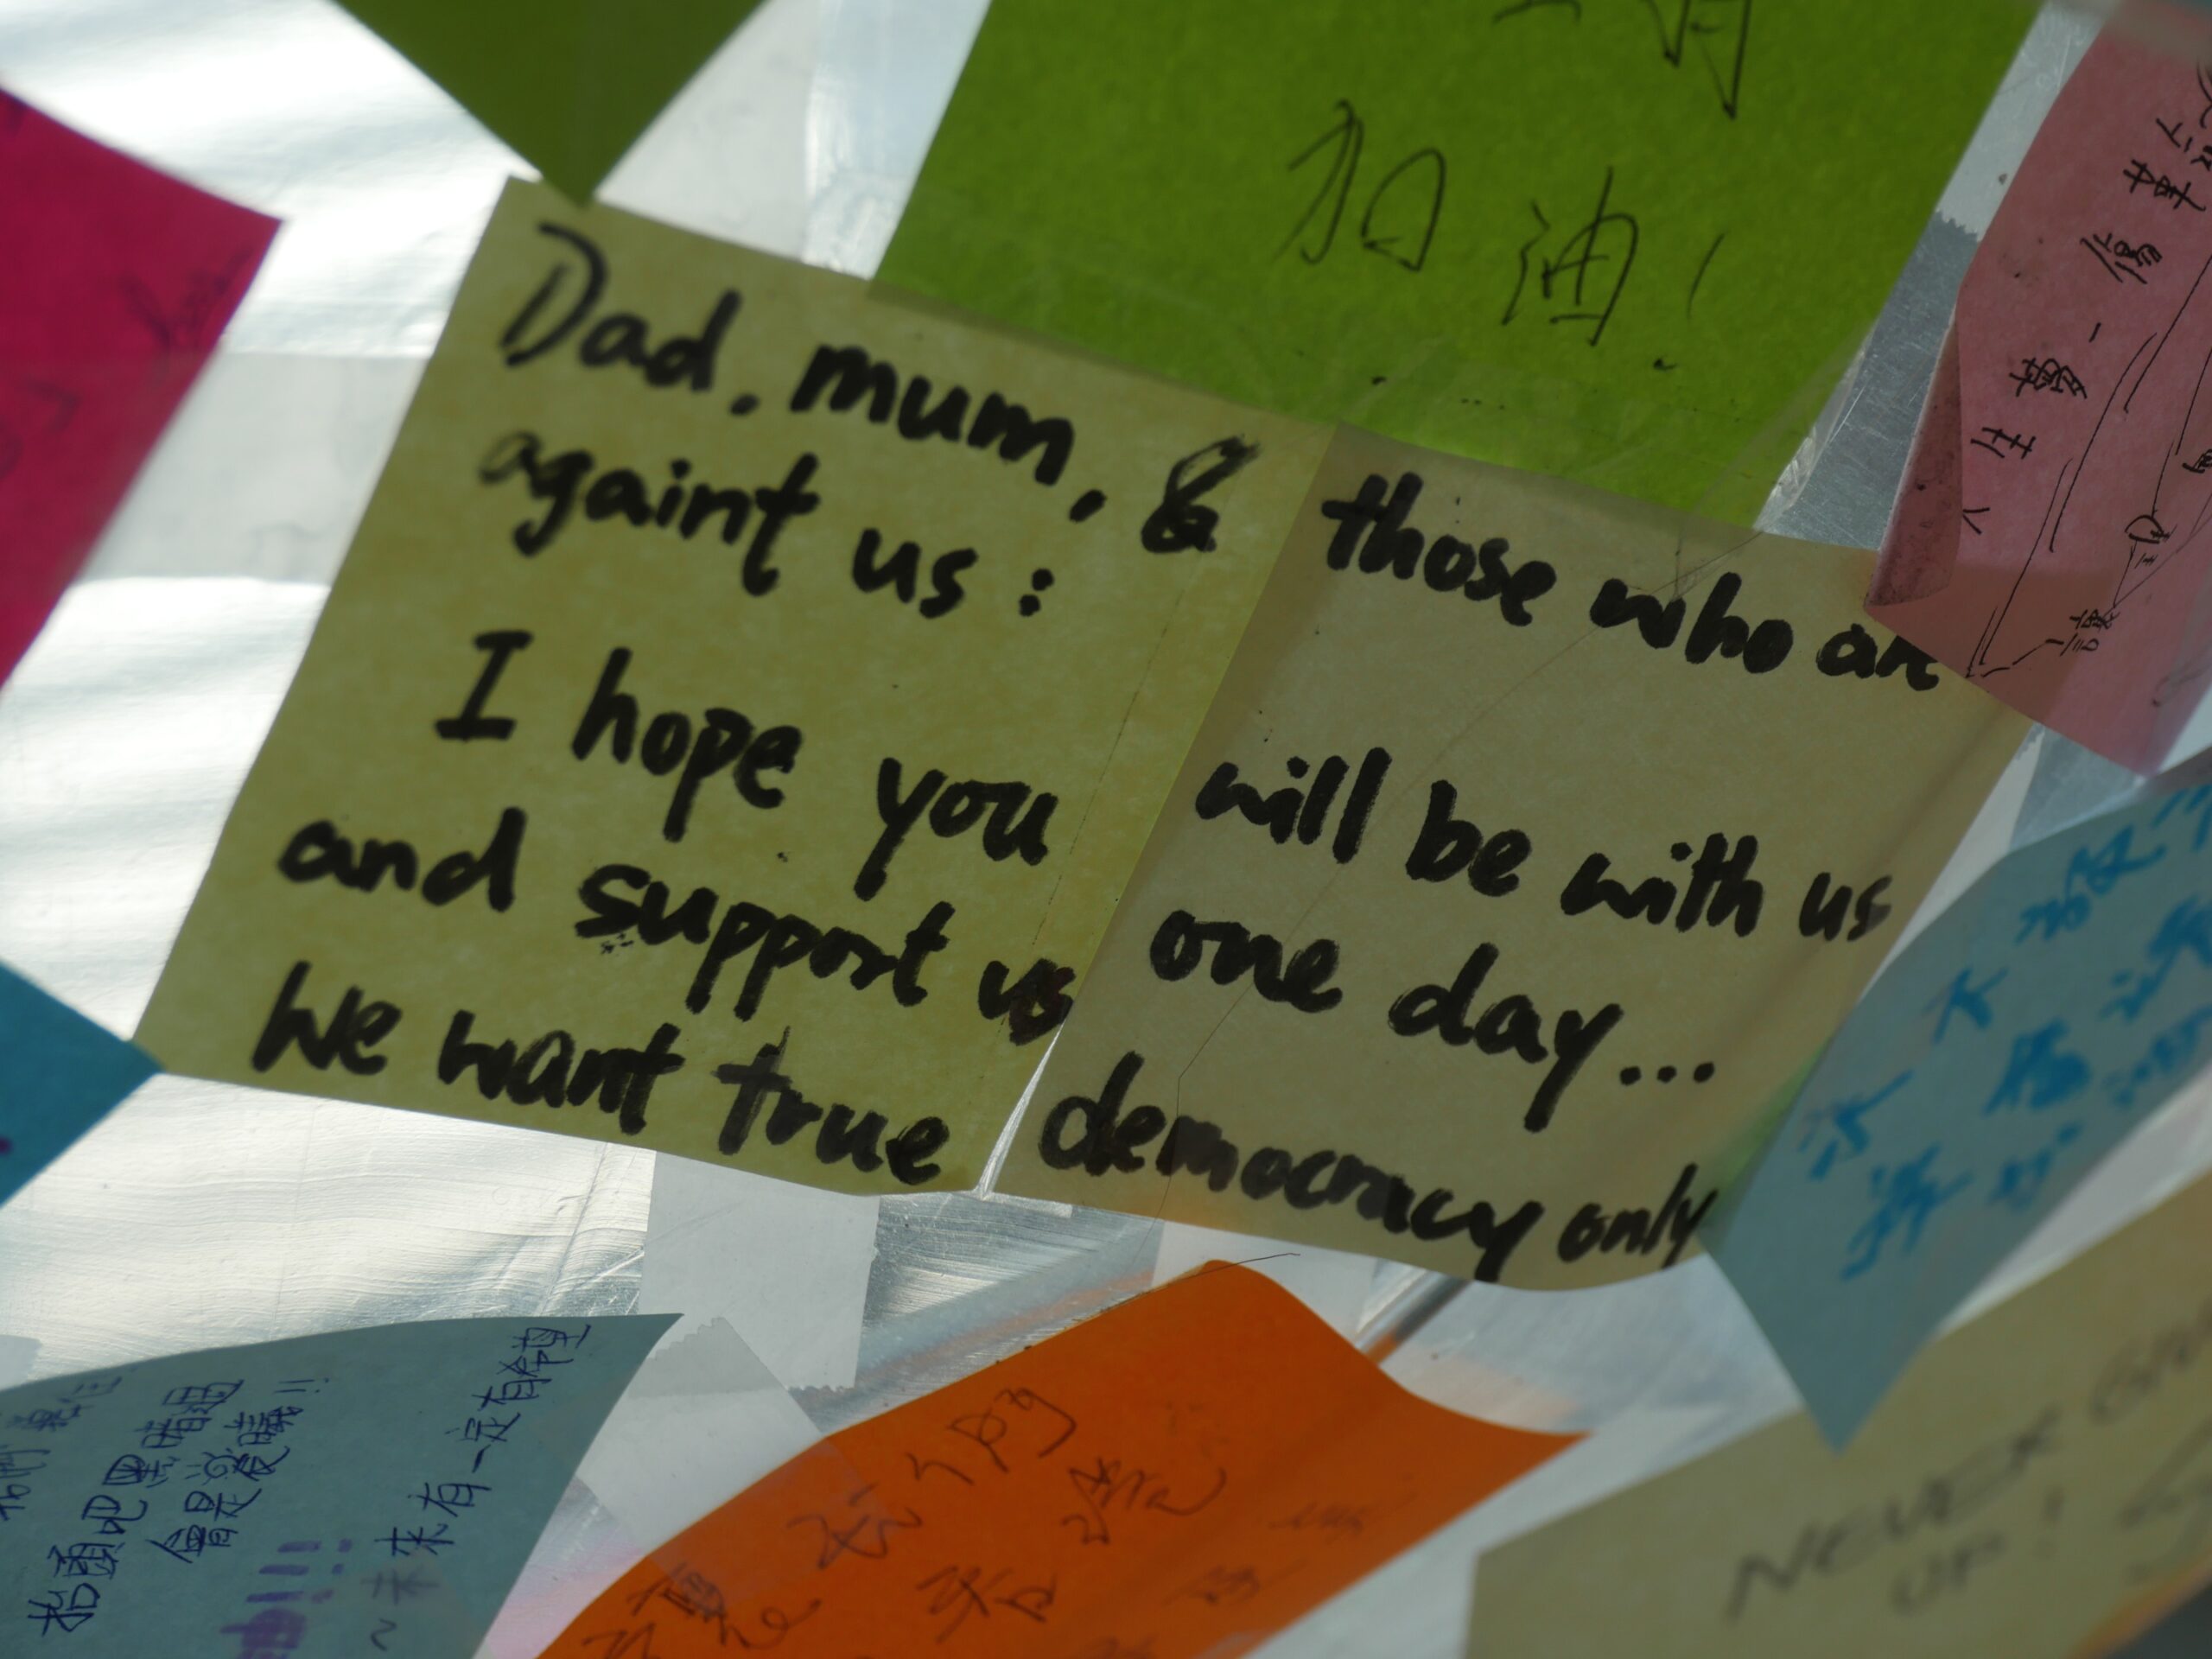 A message on the Lennon Wall Hong Kong pleads with the writer's parents for support.